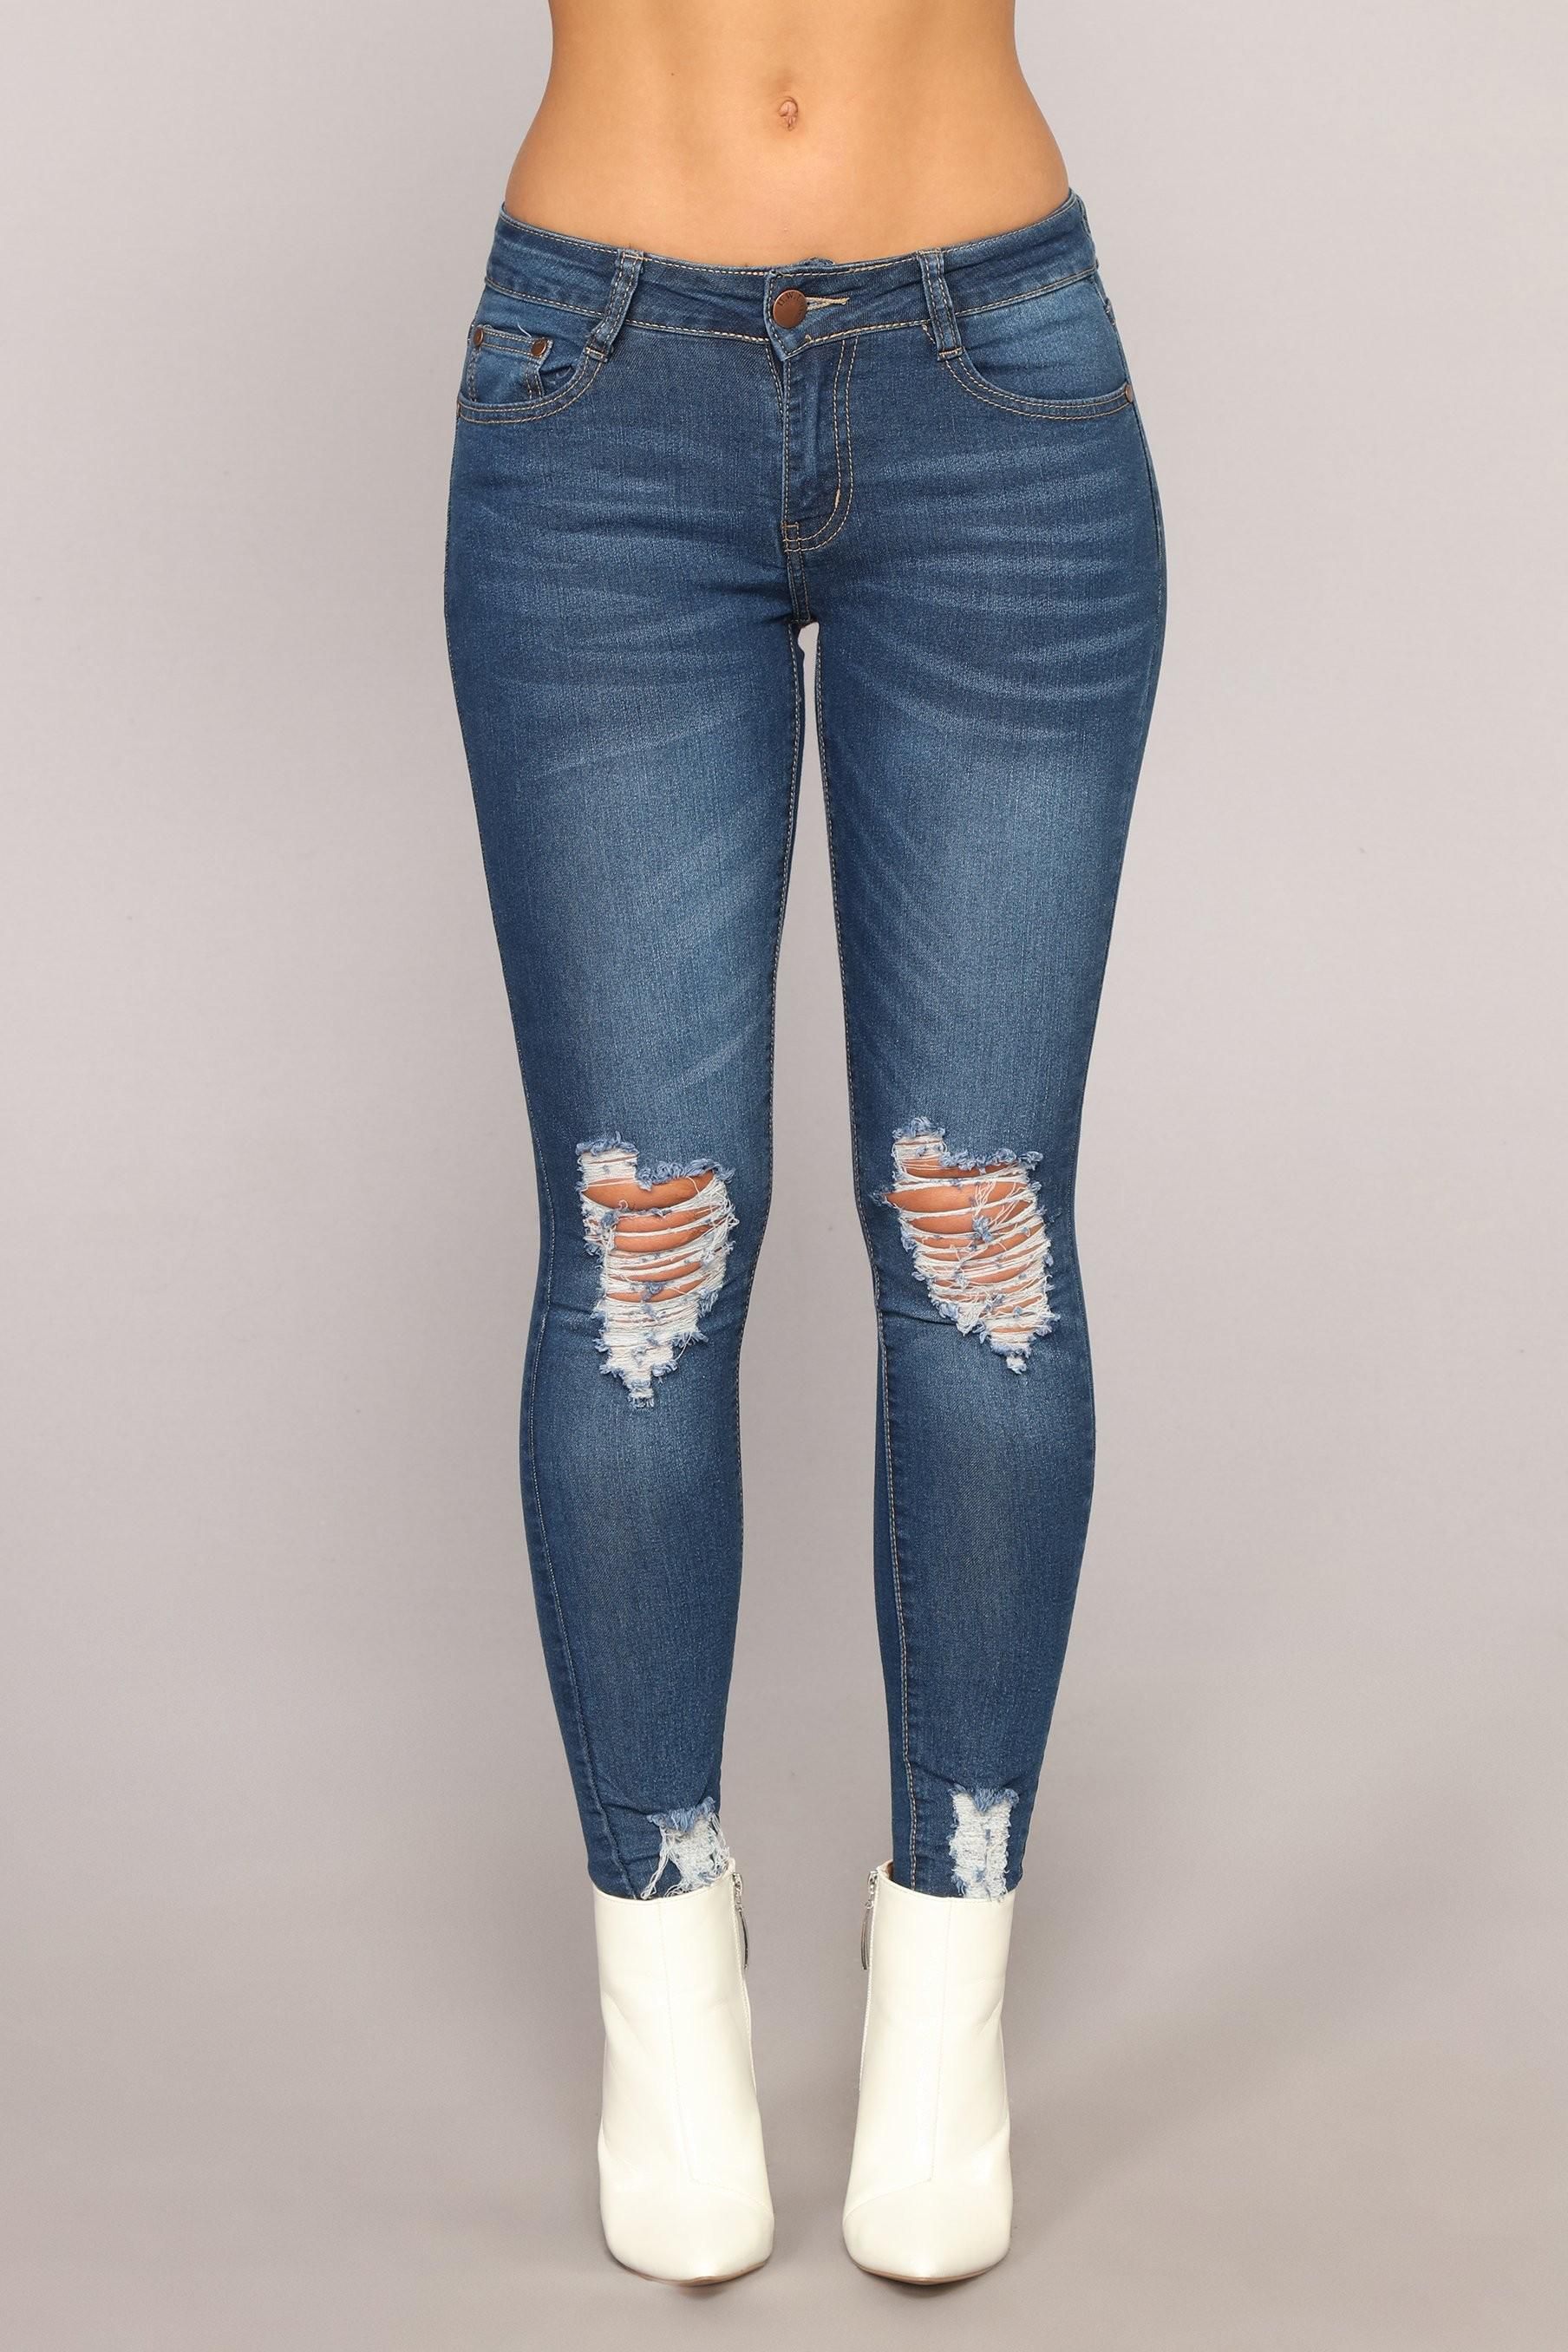 Girl On The Go Distressed Jeans